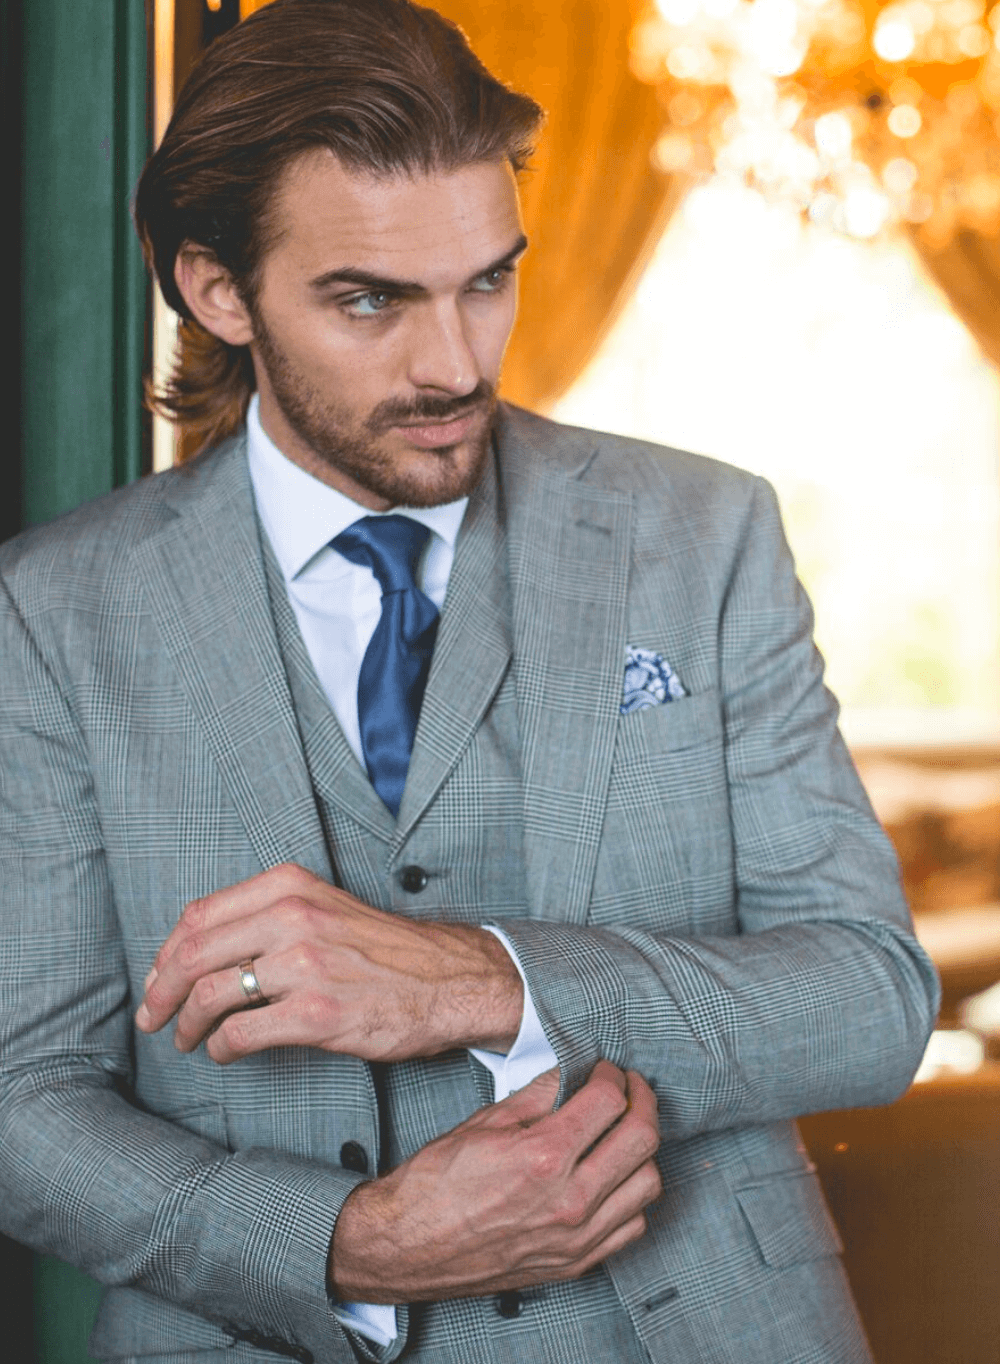 Wedding Suit Hire & Tailoring | Lookbook | Whitfield & Ward